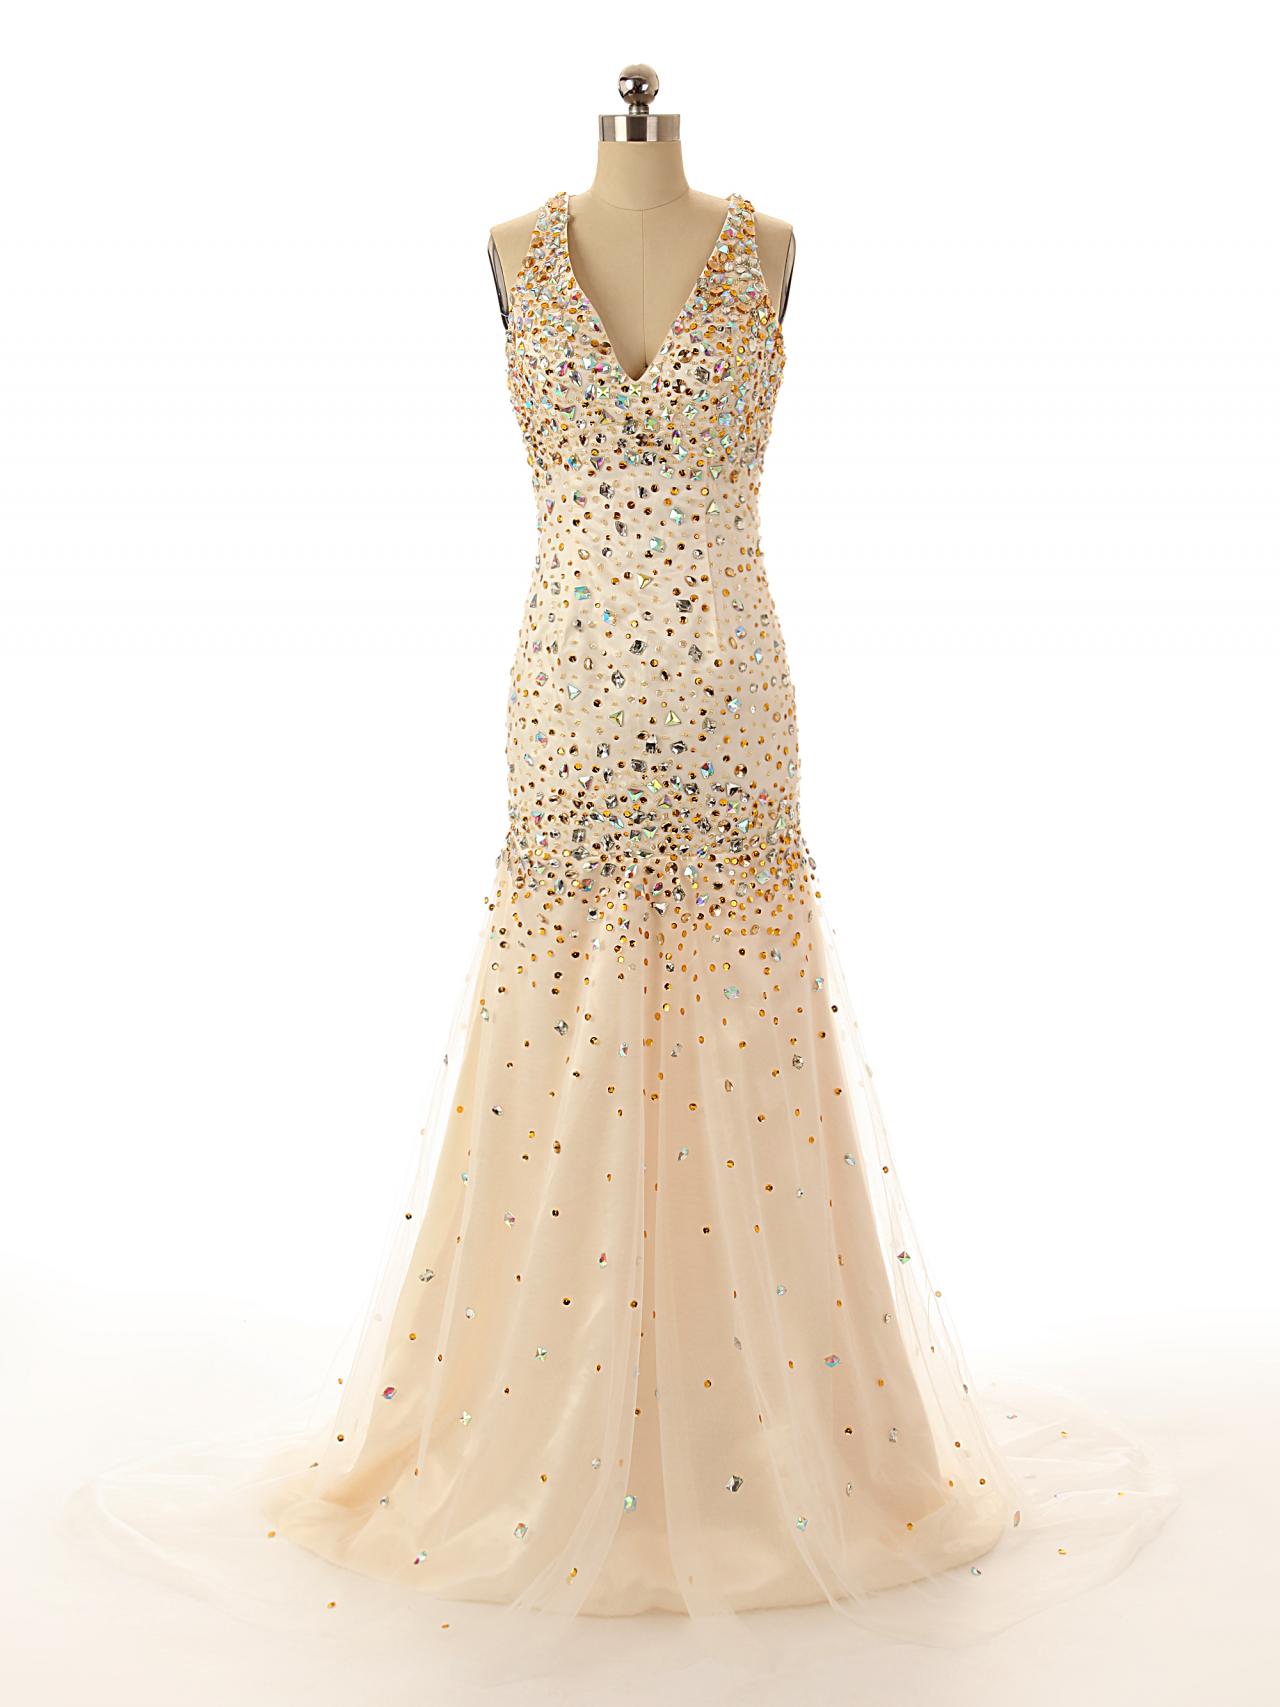 A70 V Neck Sleeveless Champagne Mermaid Evening Gowns,crystal Beaded ...